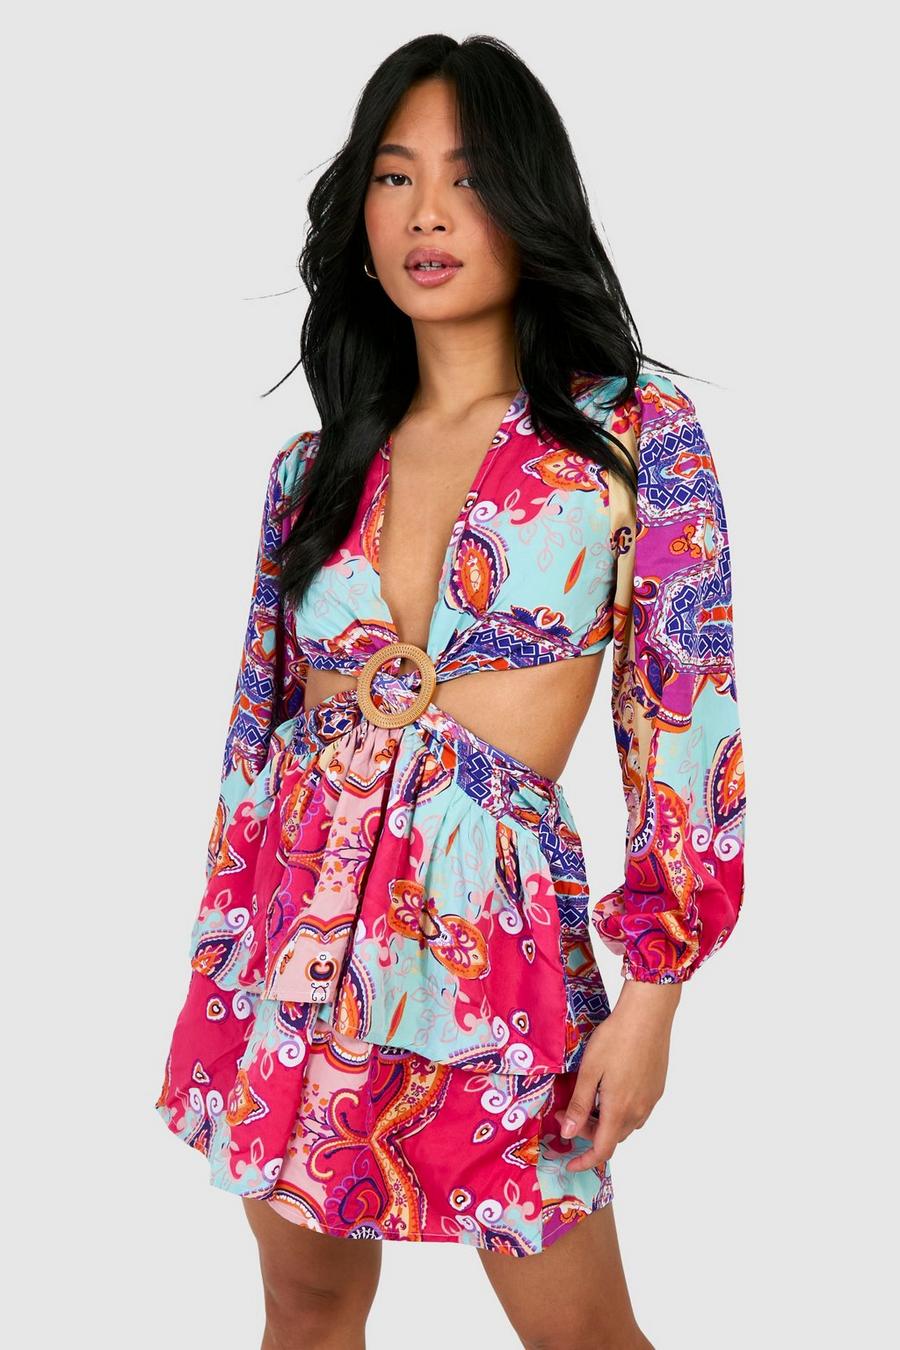 Boohoo embrace the 70s with Kimonos and flares